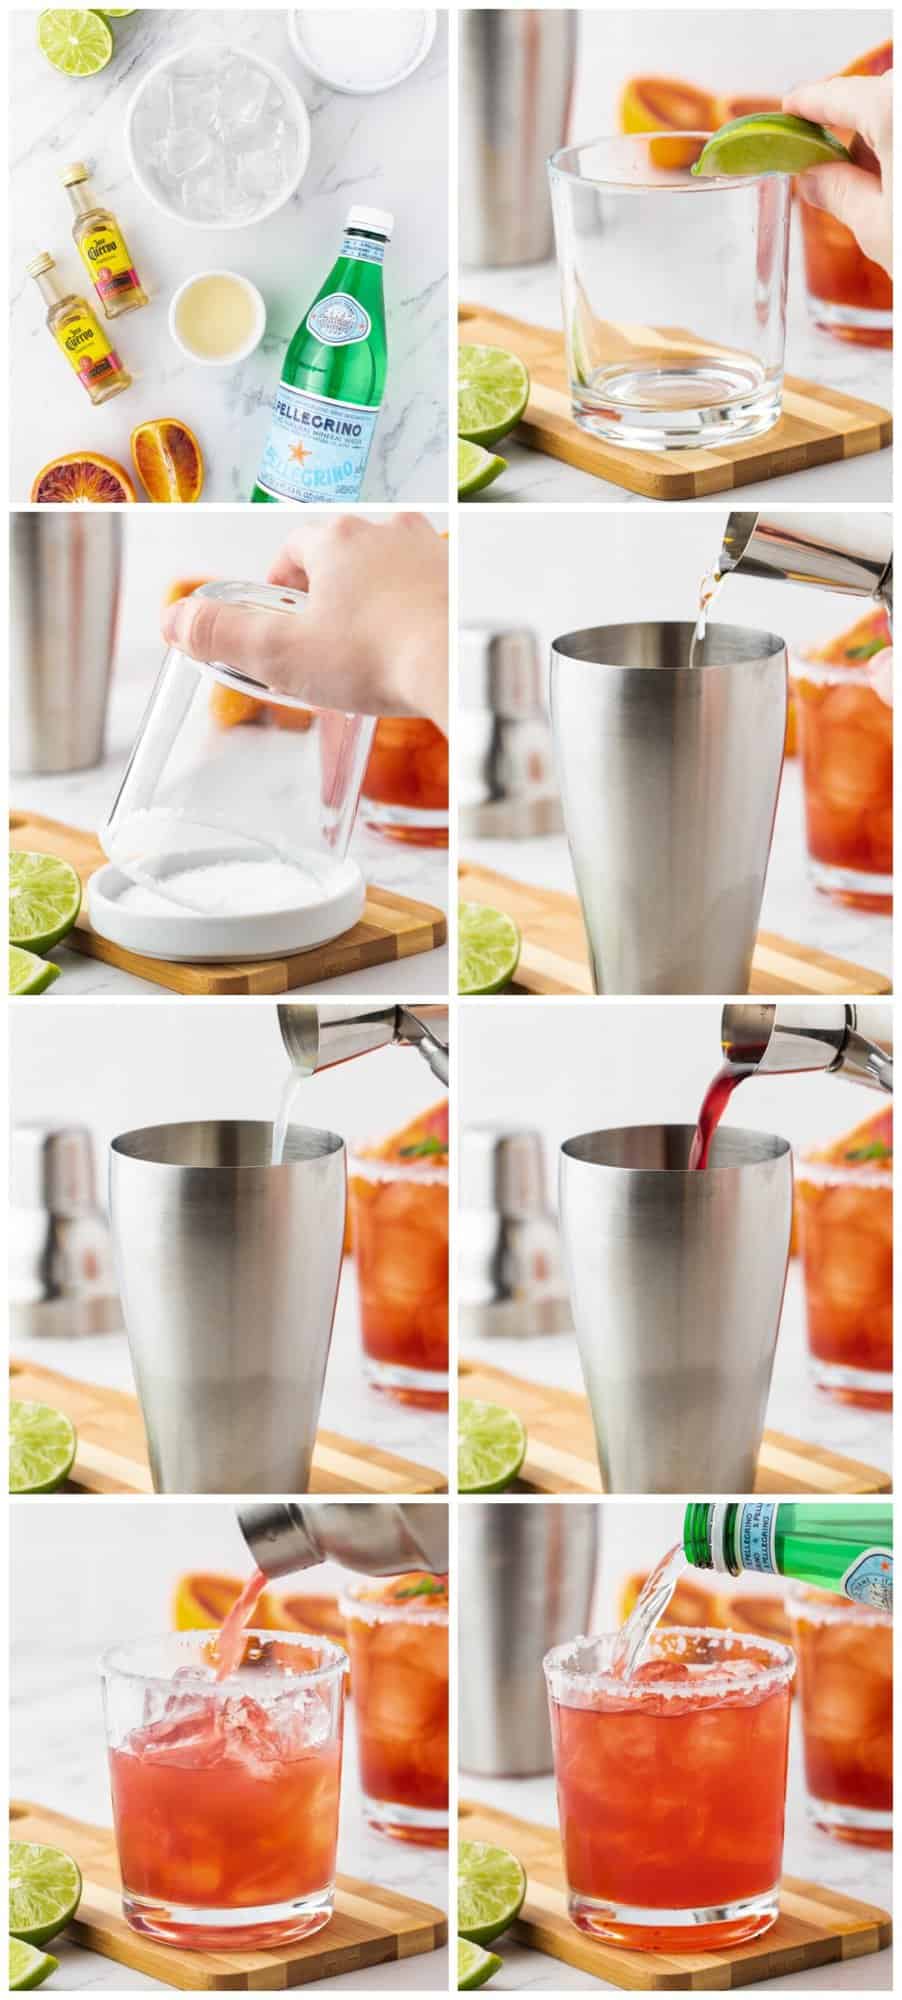 step by step photos for how to make a blood orange margarita.